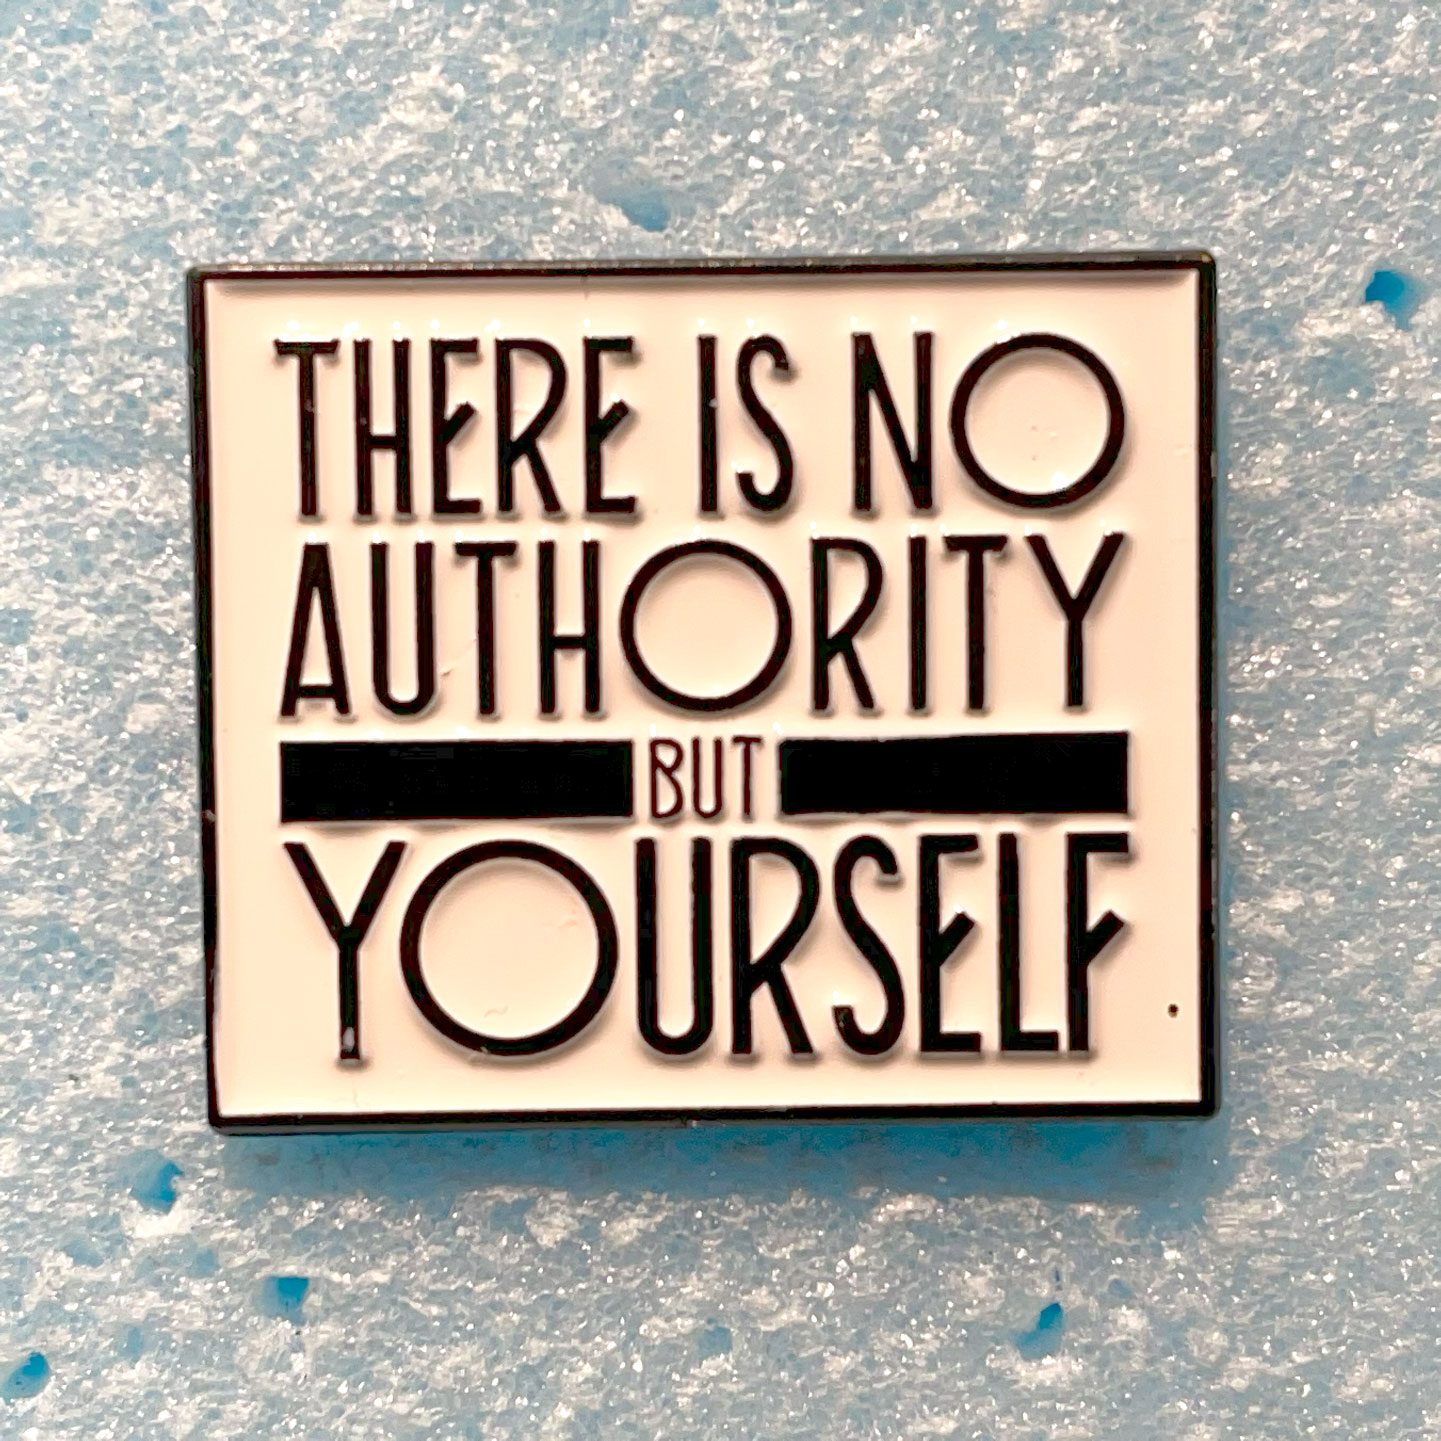 CRASS ピンバッジ There is no authority but yourself